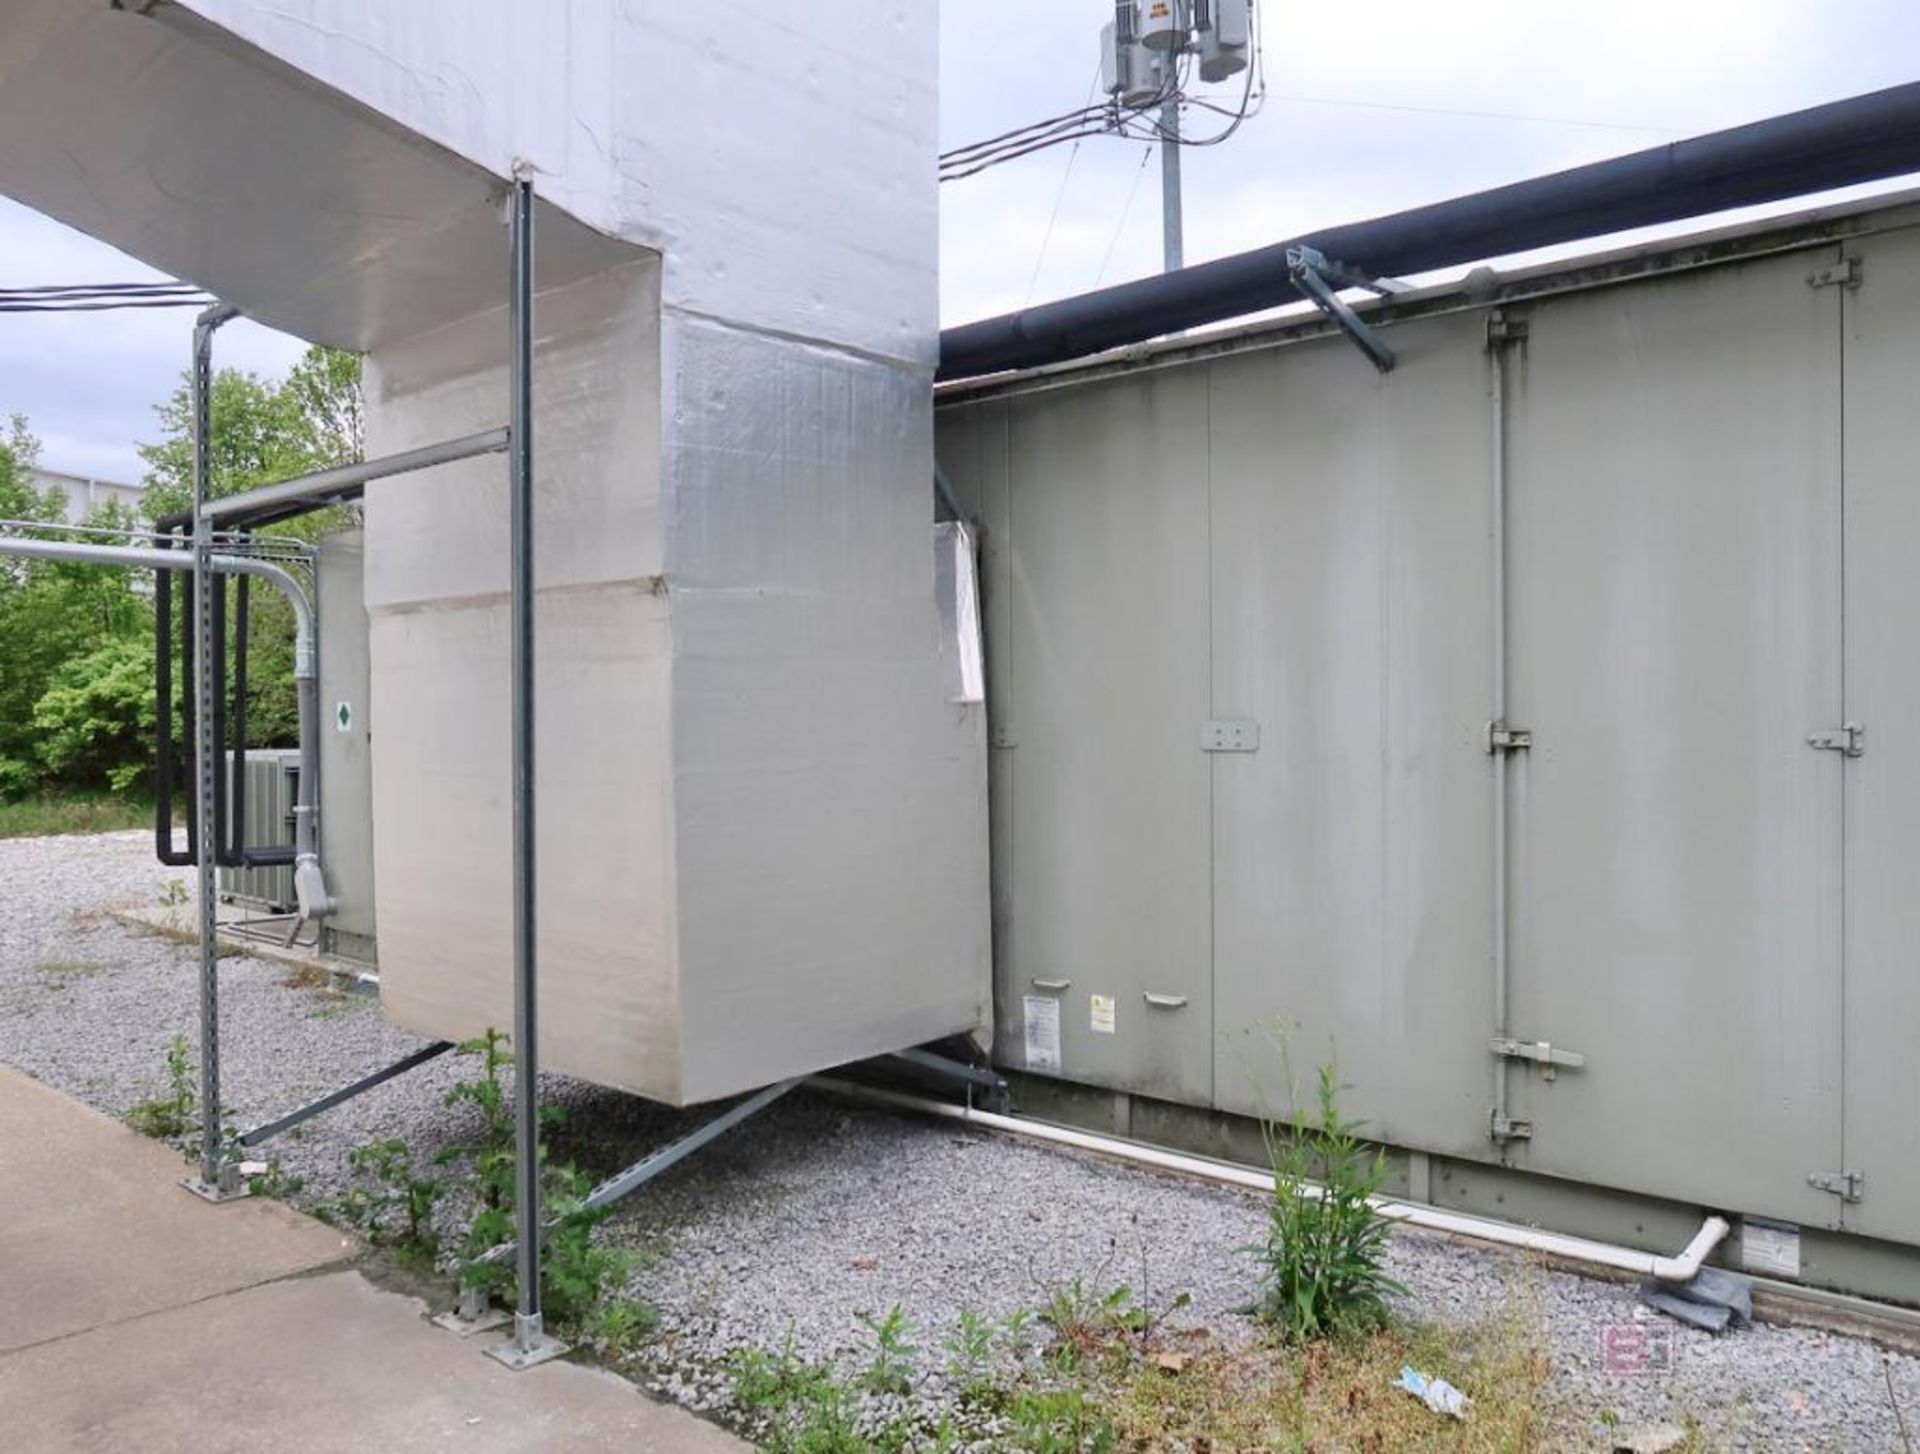 Trane Intellipak-II Self-contained Natural Gas-Fired 105-Ton HVAC System, (2019) - Image 6 of 28